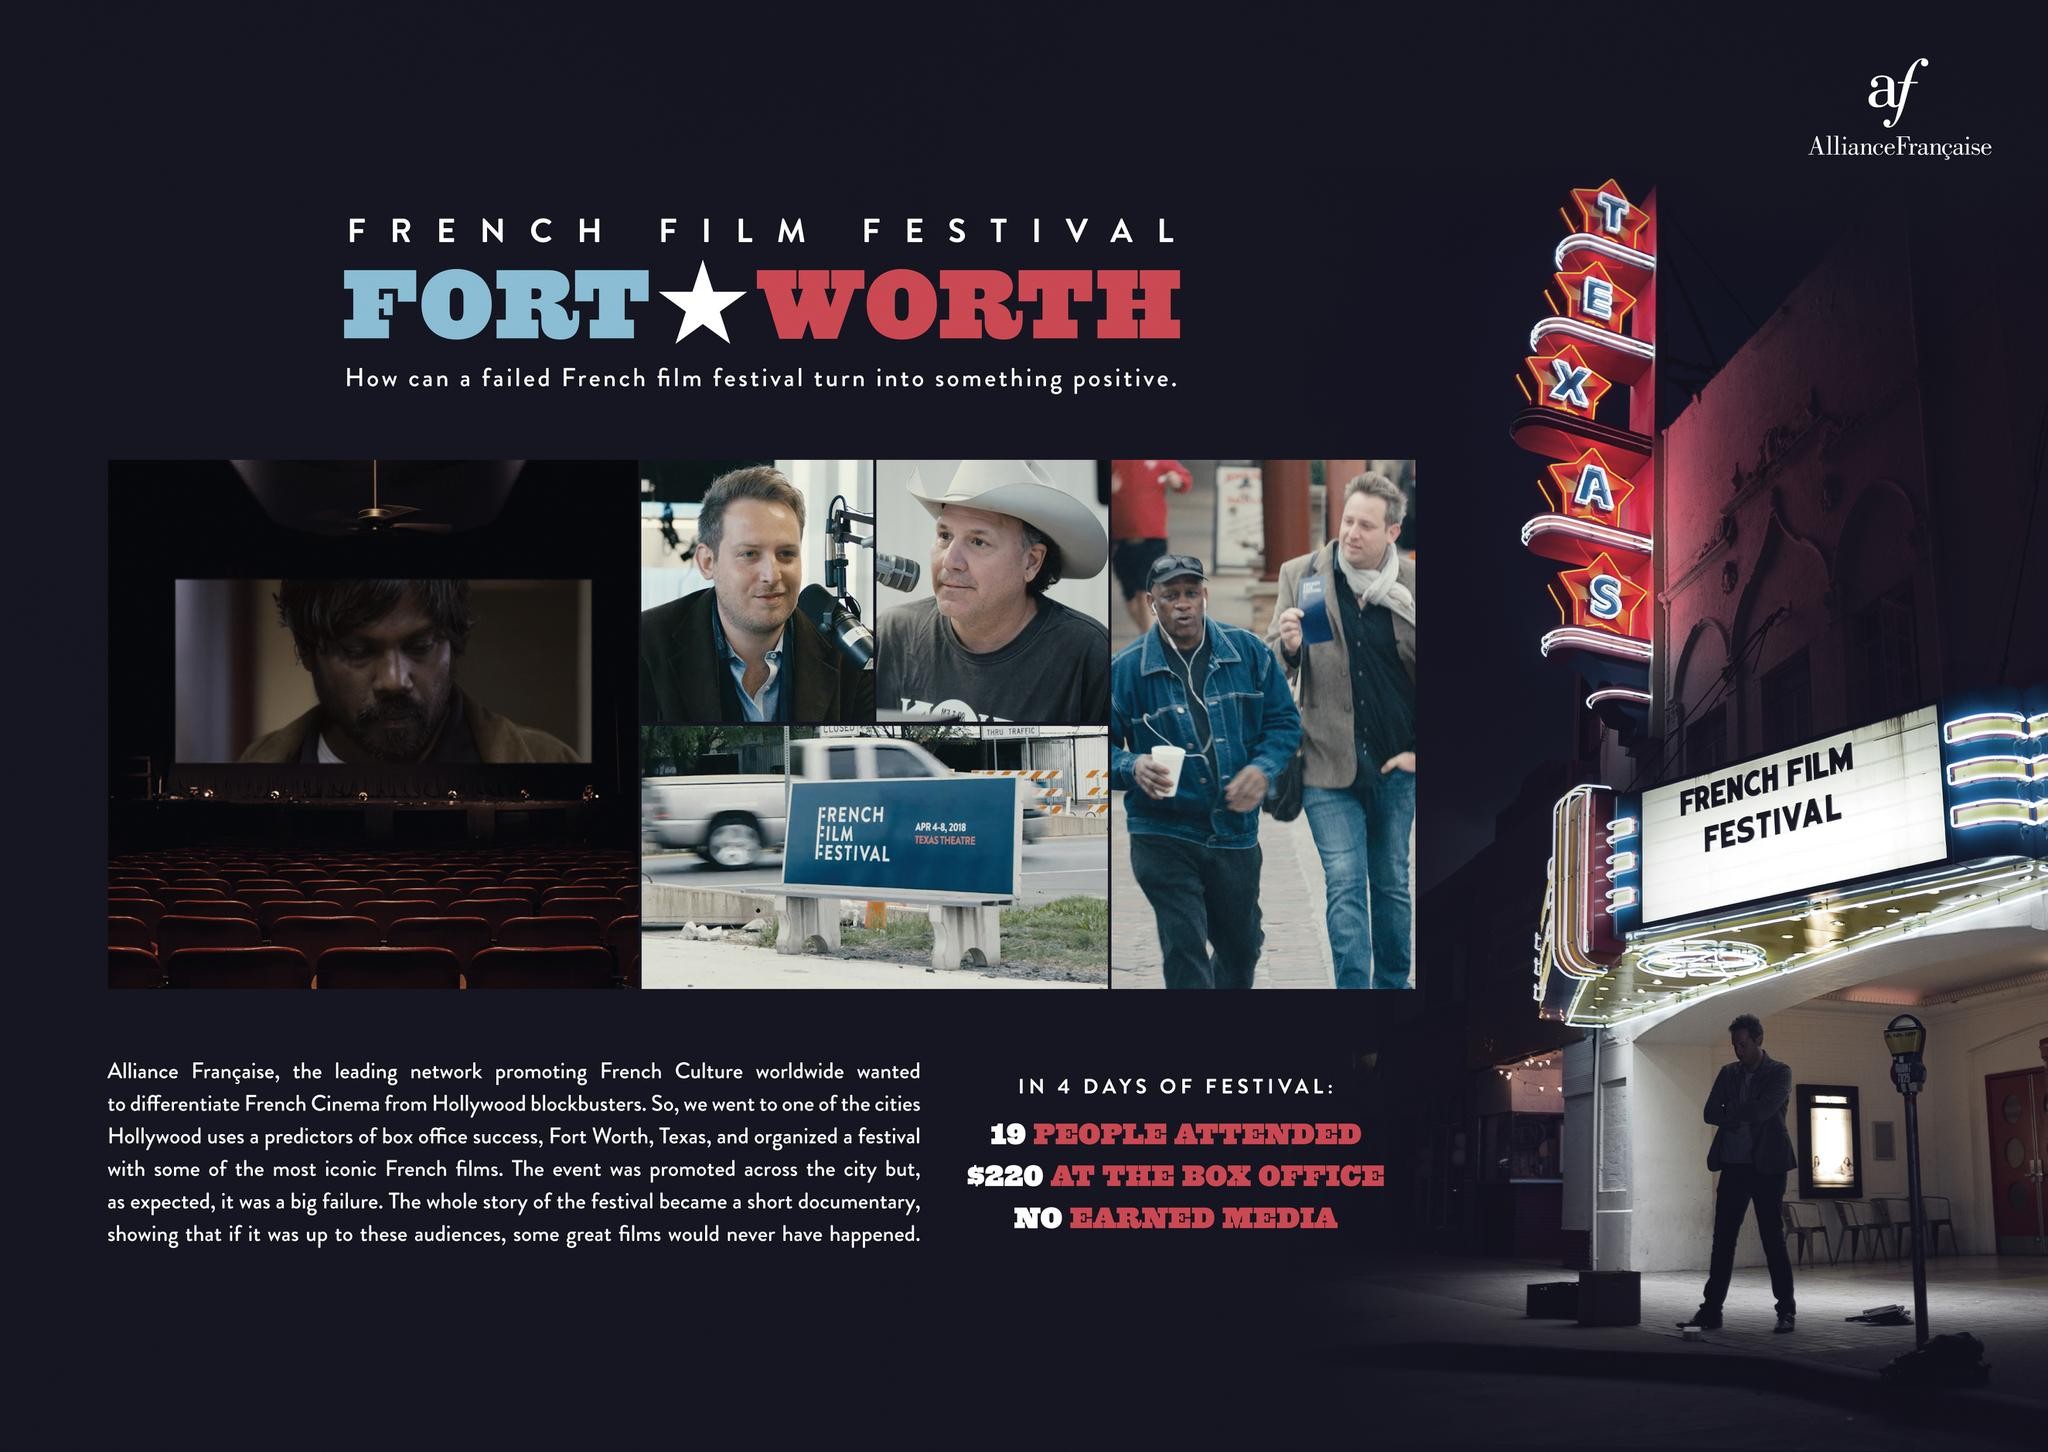 French Film Festival in Fort Worth